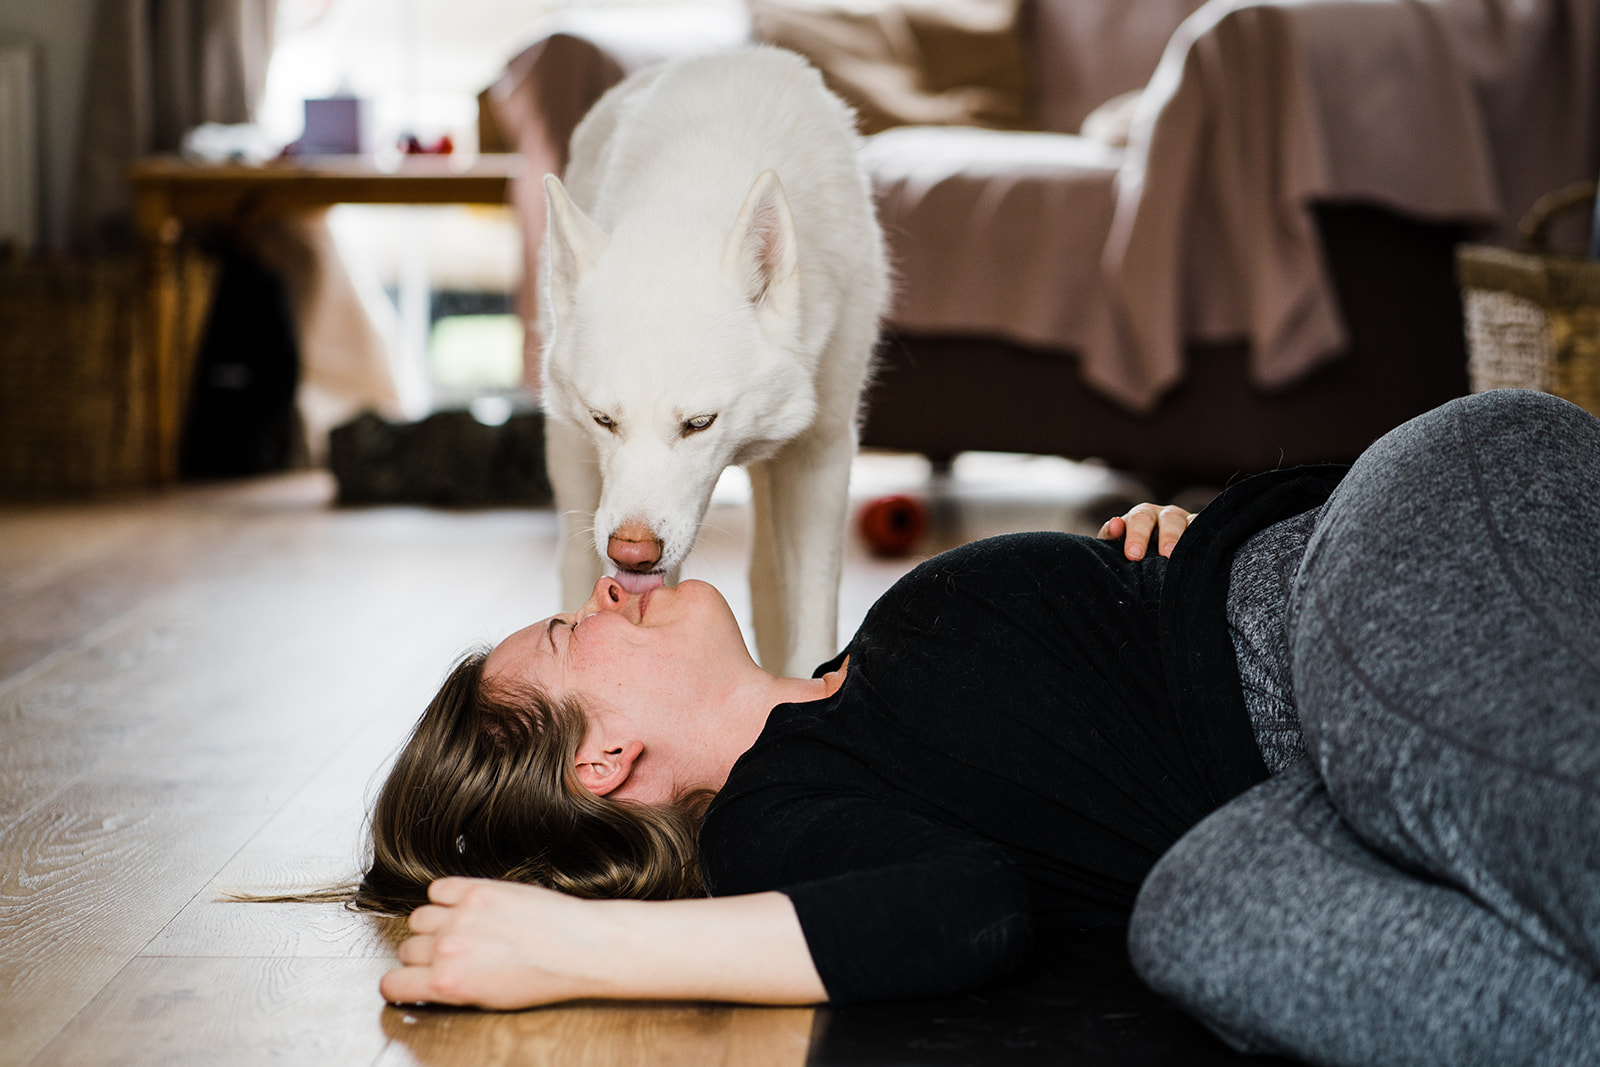 Husky licking its owners face while she is laying on the floor.